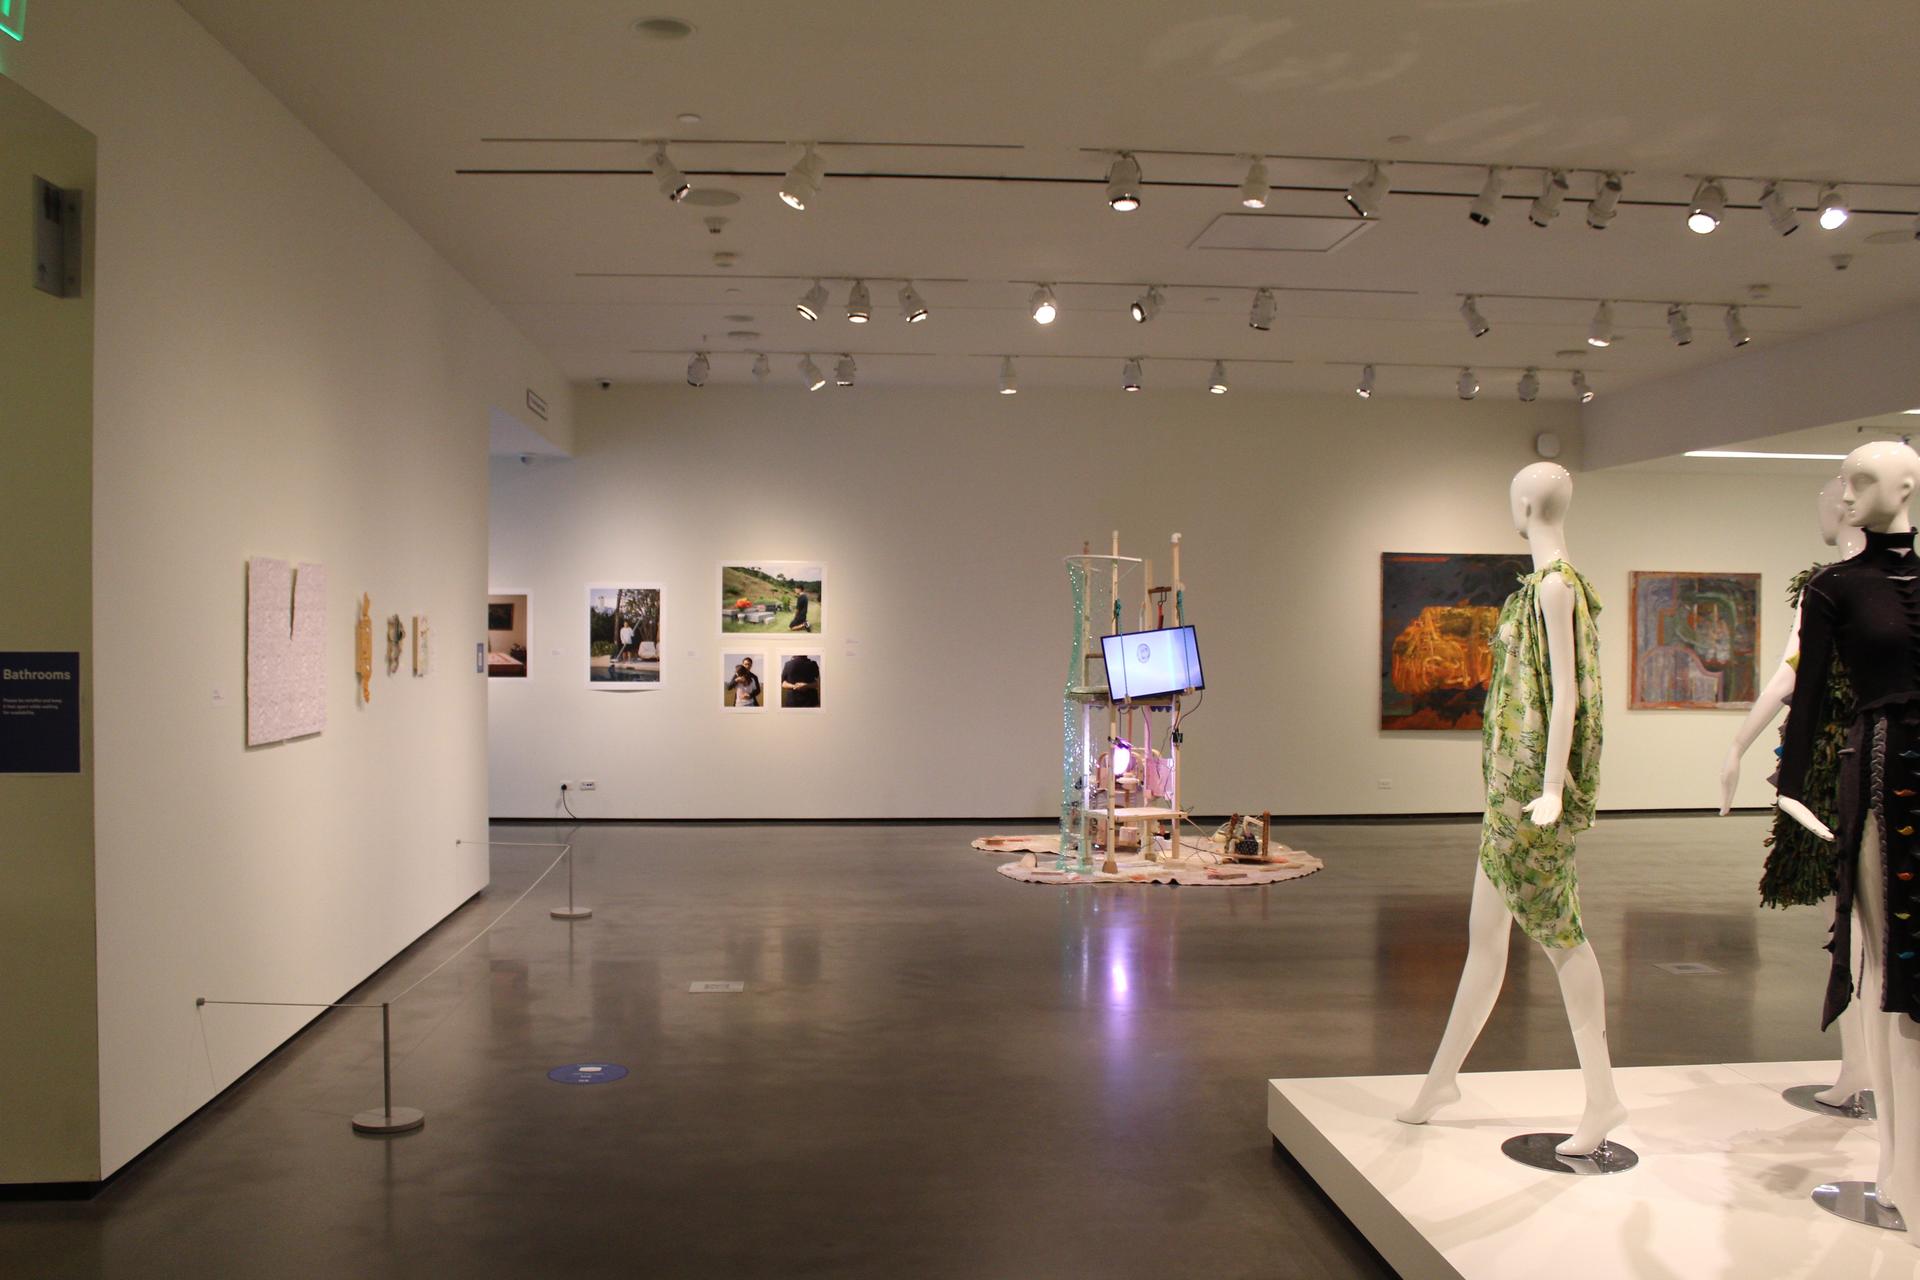 Image of the work installed in the gallery